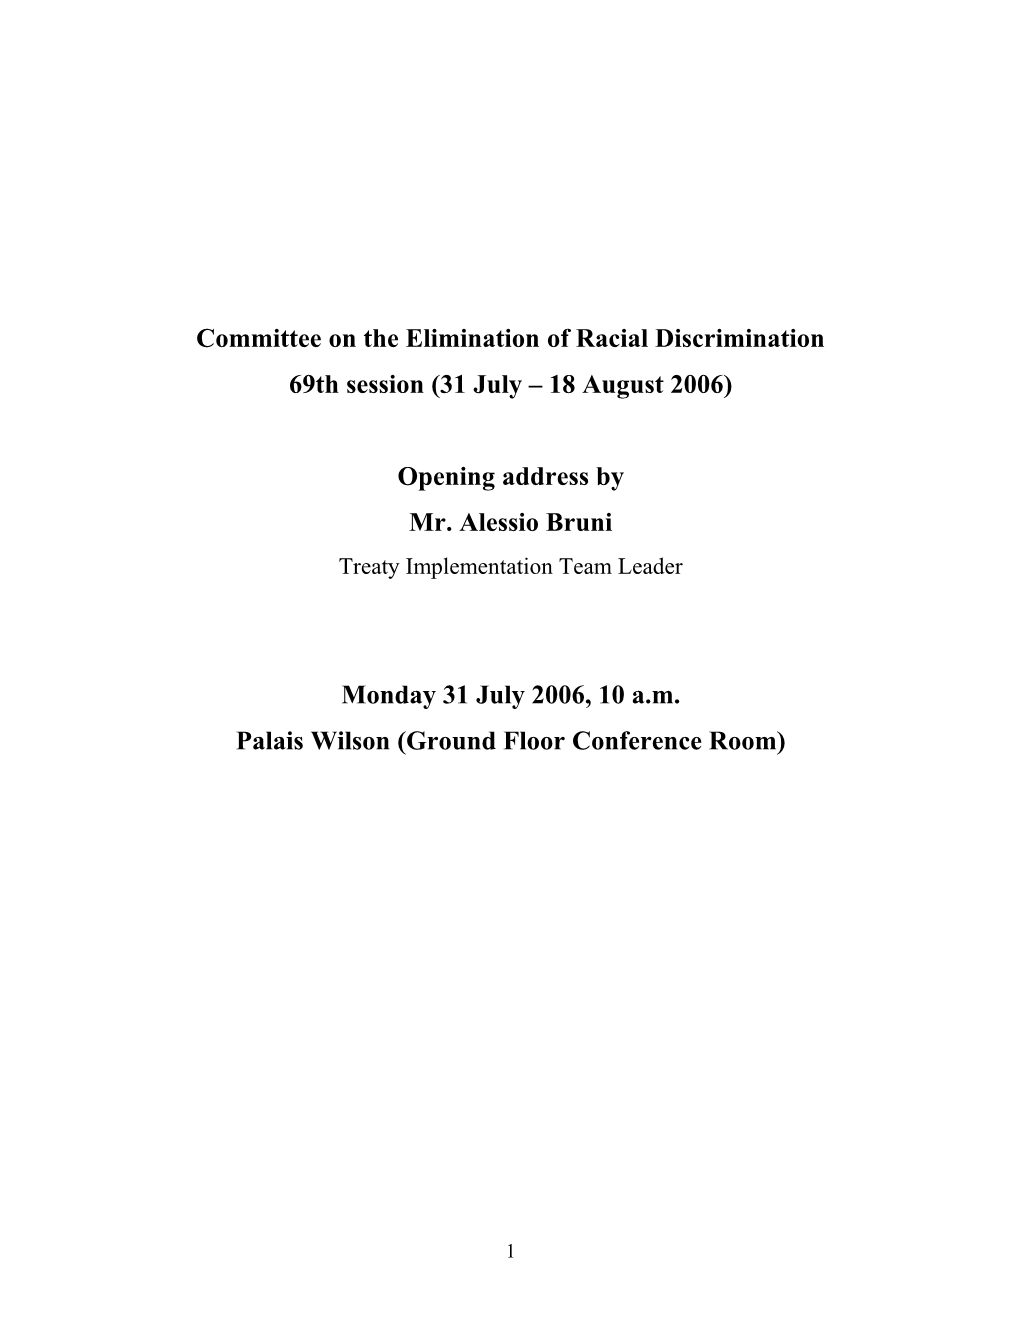 Committee on the Elimination of Racial Discrimination s8